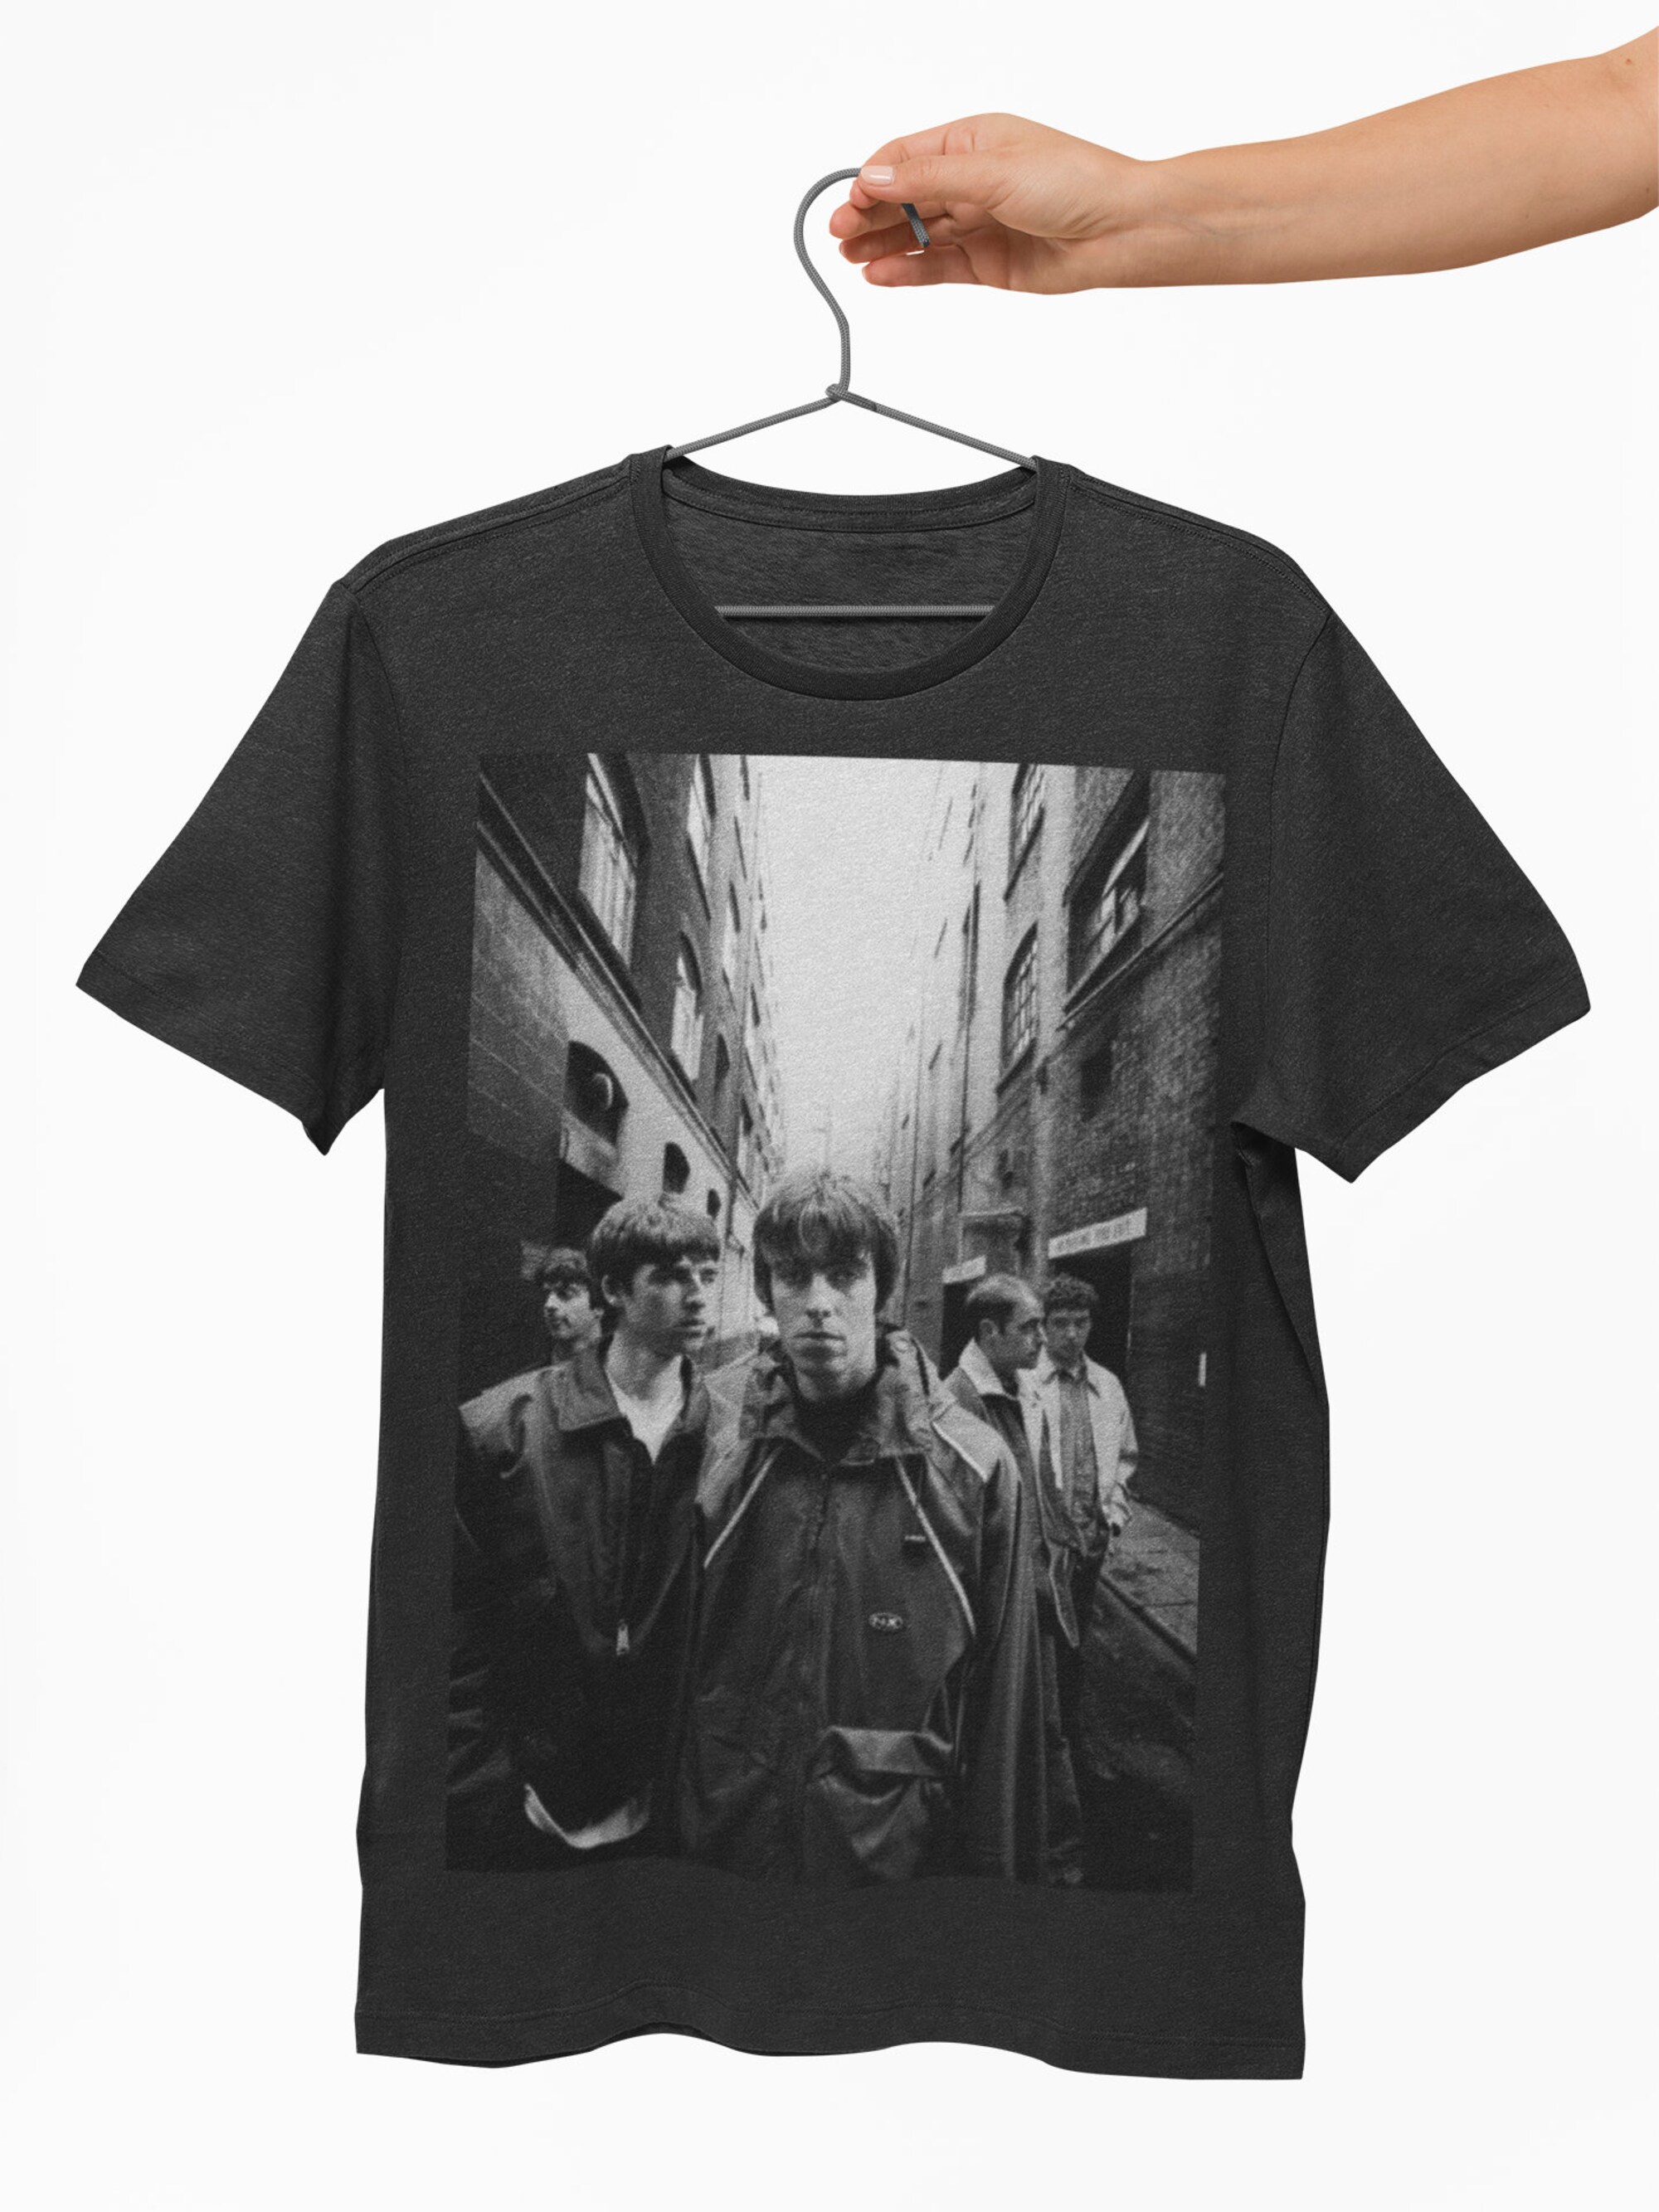 Discover Oasis Band T Shirt Liam Noel Gallagher Vintage Custom Print Unisex Homage T-Shirt Tee Style Aesthetic Men Woman